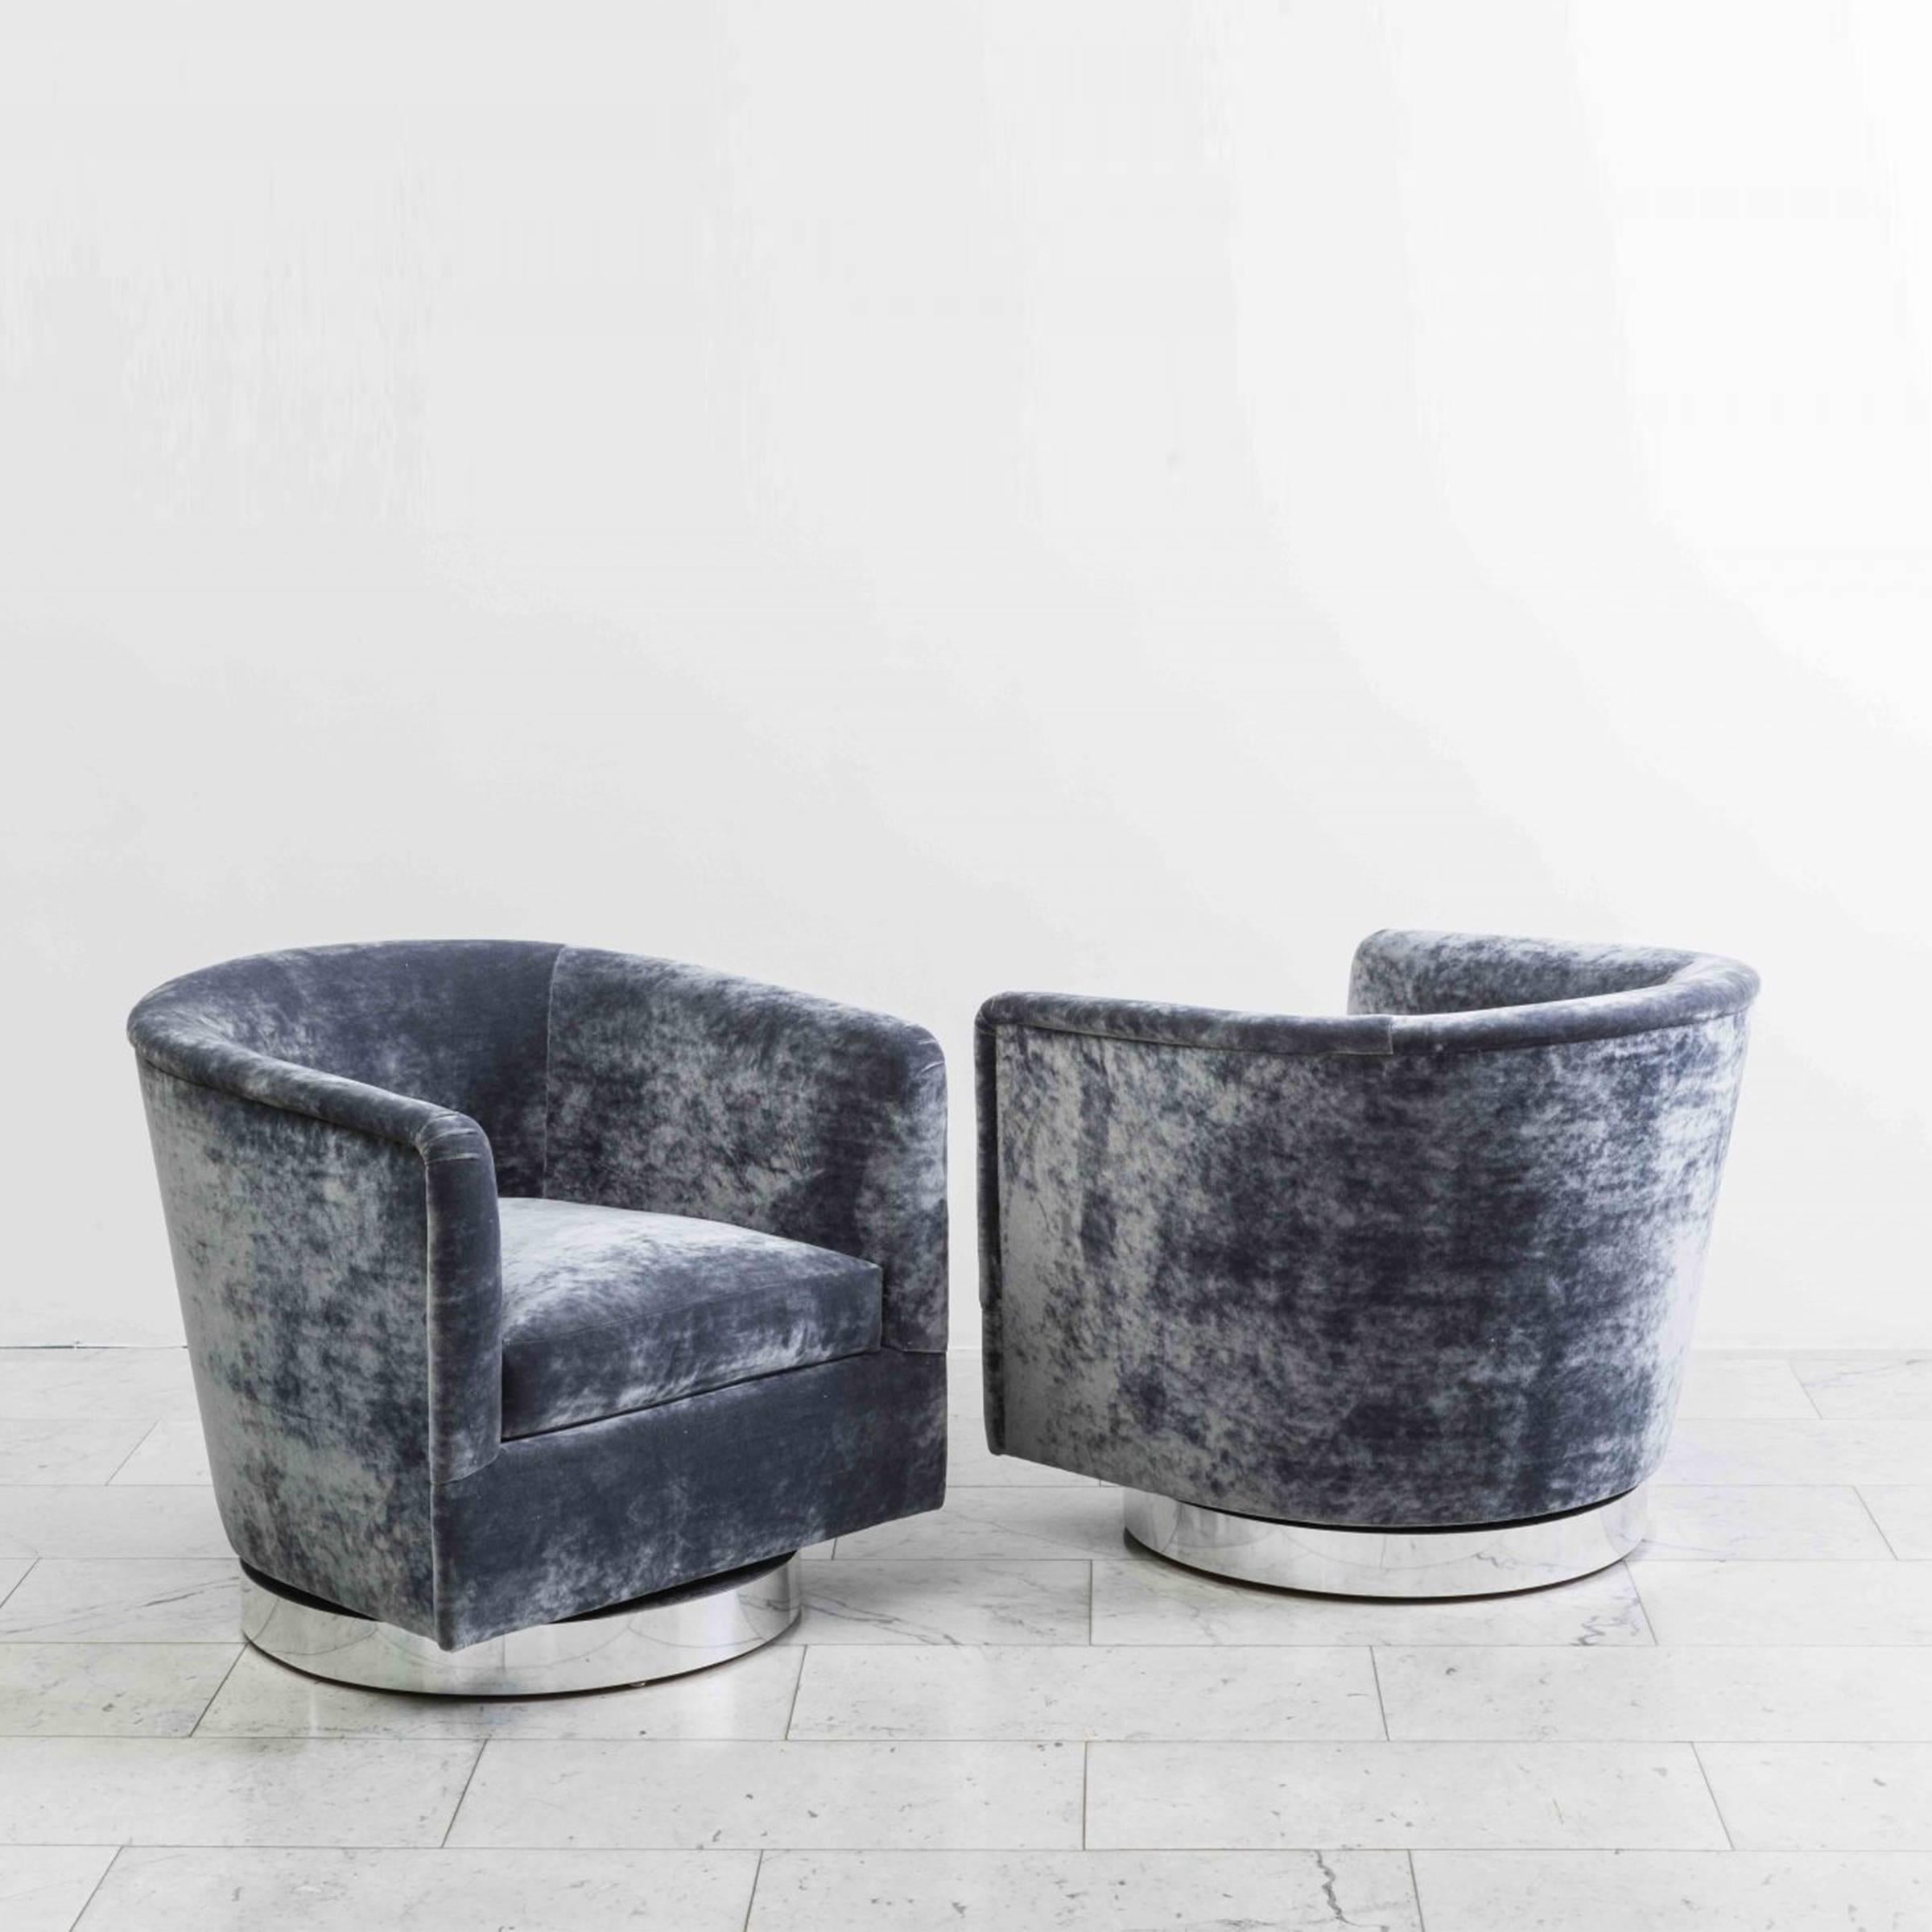 A beautiful pair of swivel chairs designed by Milo Baughman. Each chair has a circular chrome base that swivels with ease. Elegant in design, the chairs are also extremely comfortable, offering wonderful back support. The chairs feature new